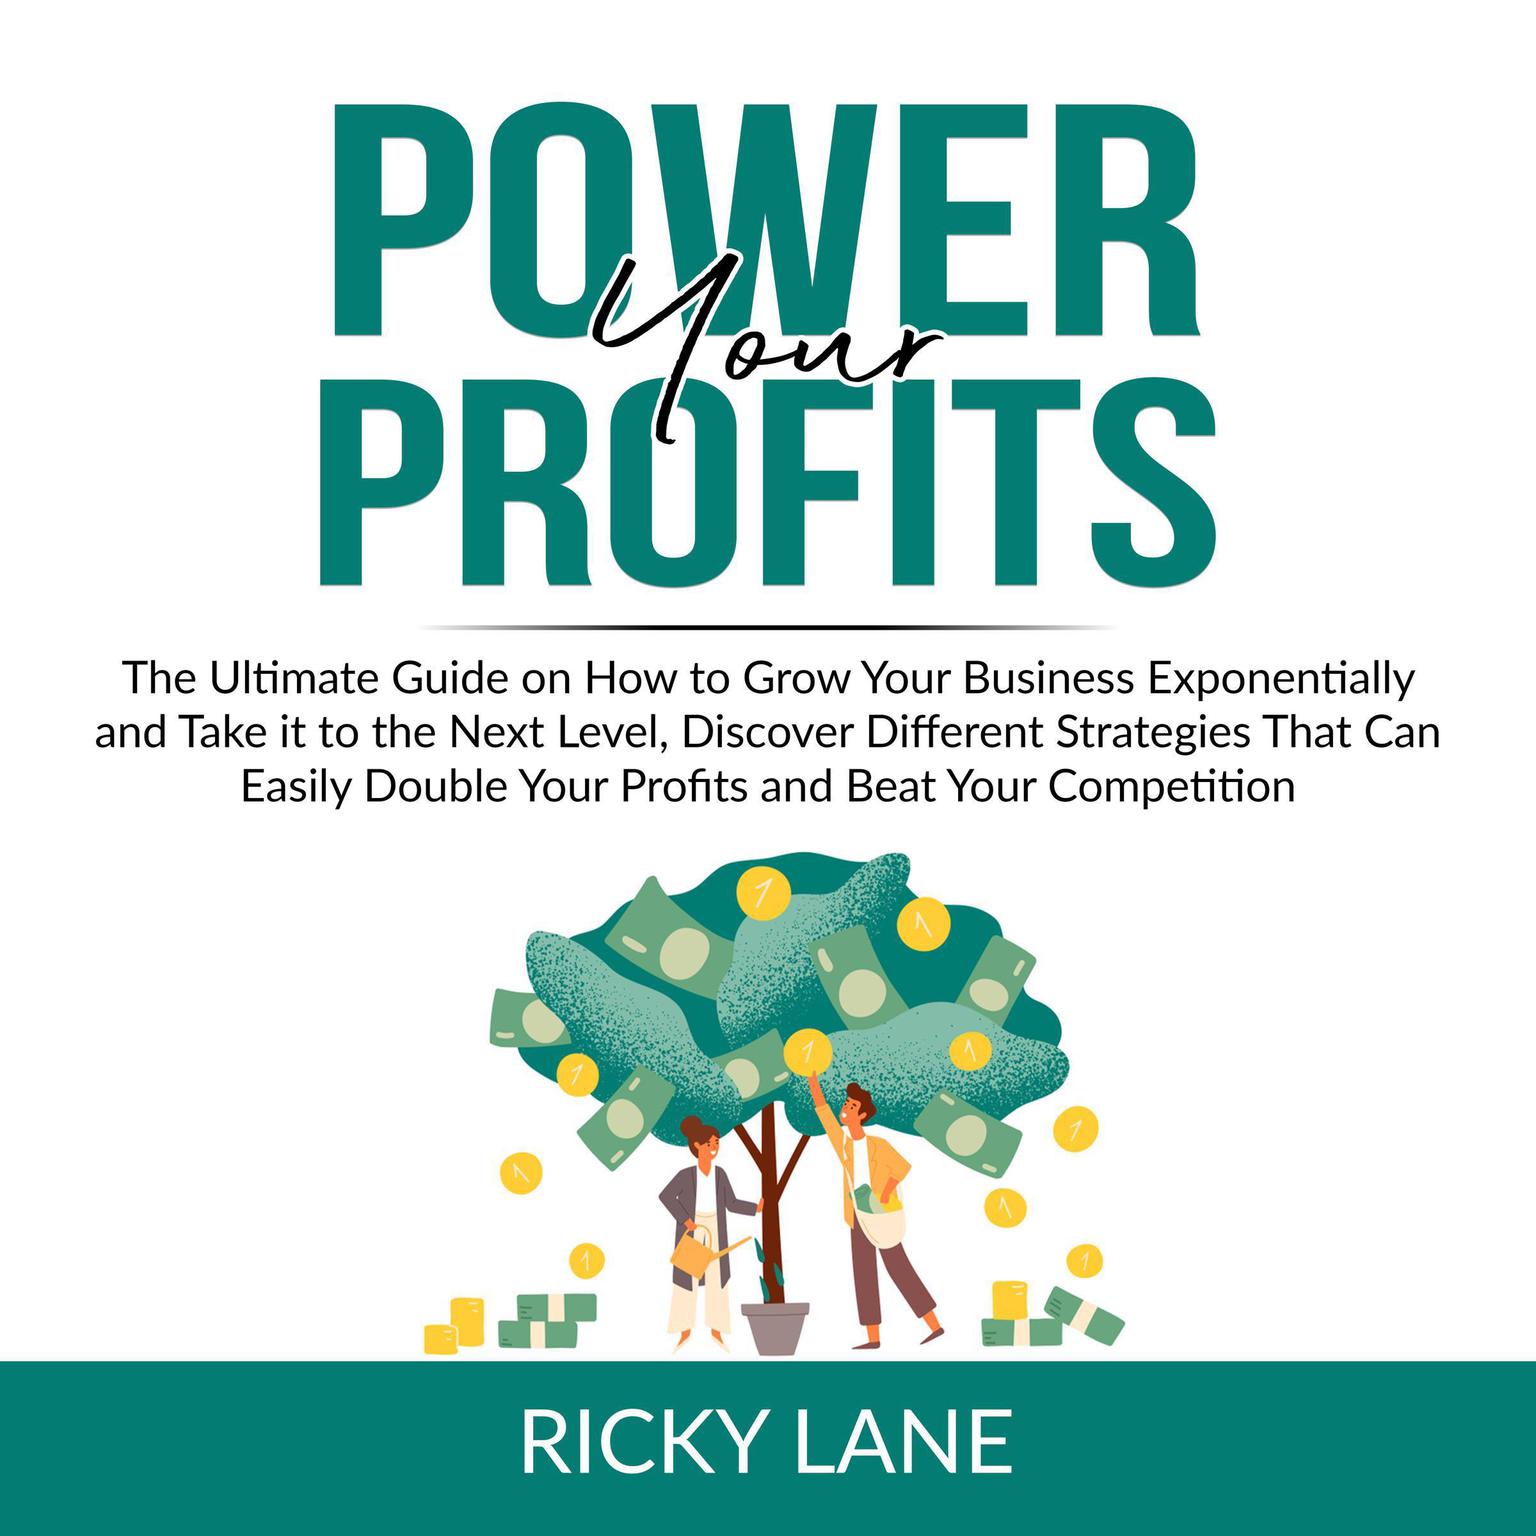 Power Your Profits: The Ultimate Guide on How to Grow Your Business Exponentially and Take it to the Next Level, Discover Different Strategies That Can Easily Double Your Profits and Beat Your Competition Audiobook, by Ricky Lane